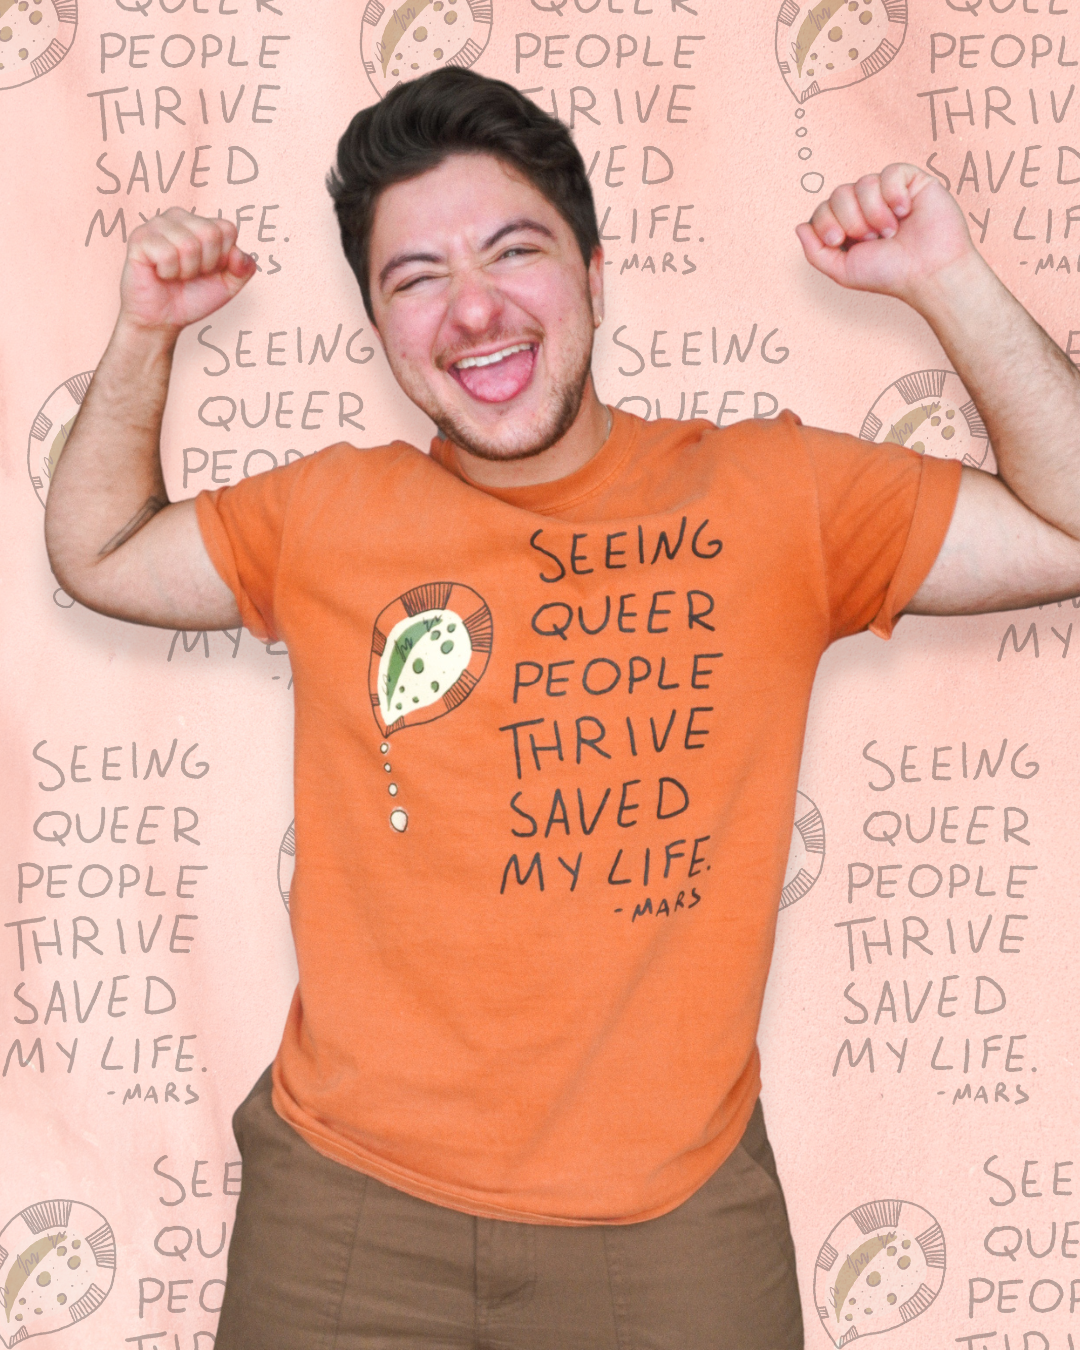 Seeing Queer People Thrive Saved My Life Shirt